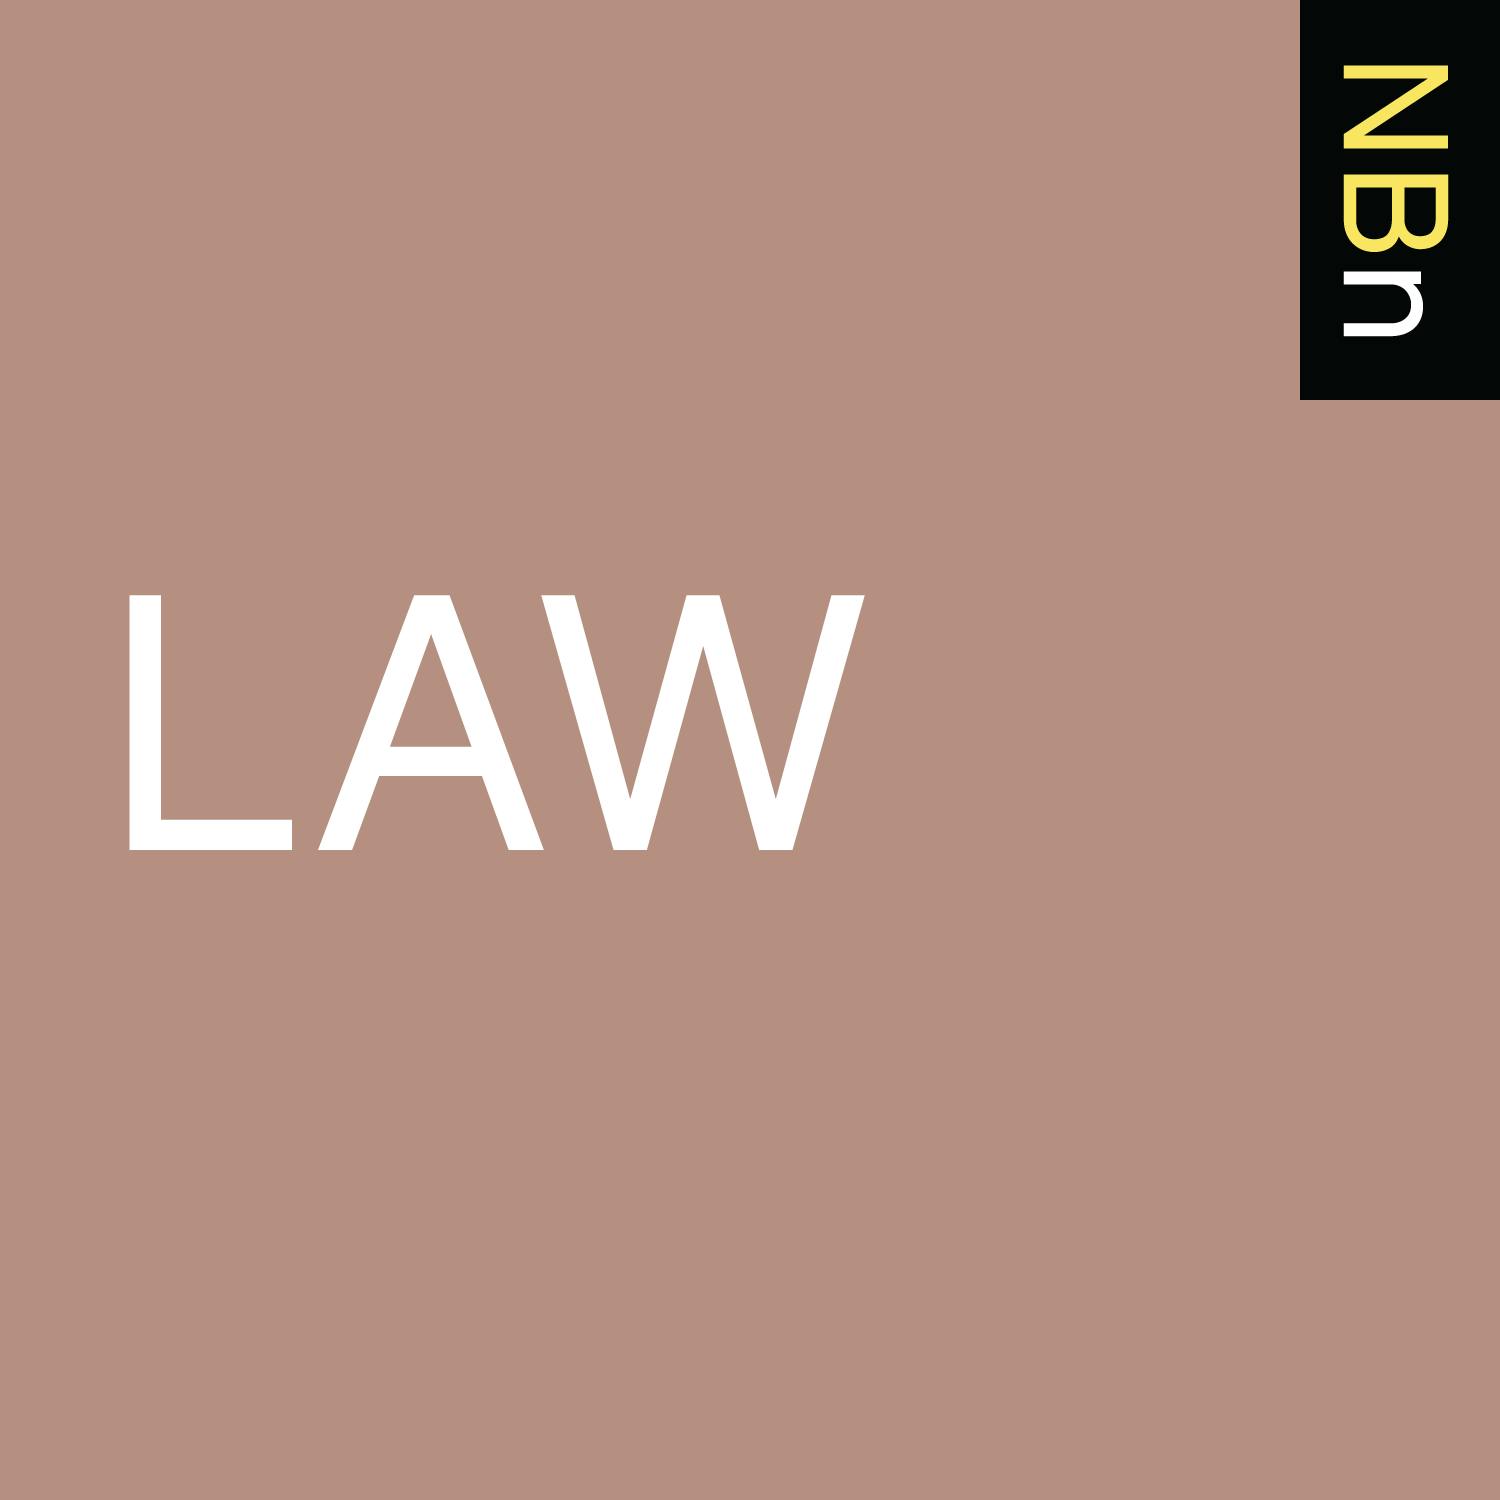 Premium Ad-Free: New Books in Law podcast tile